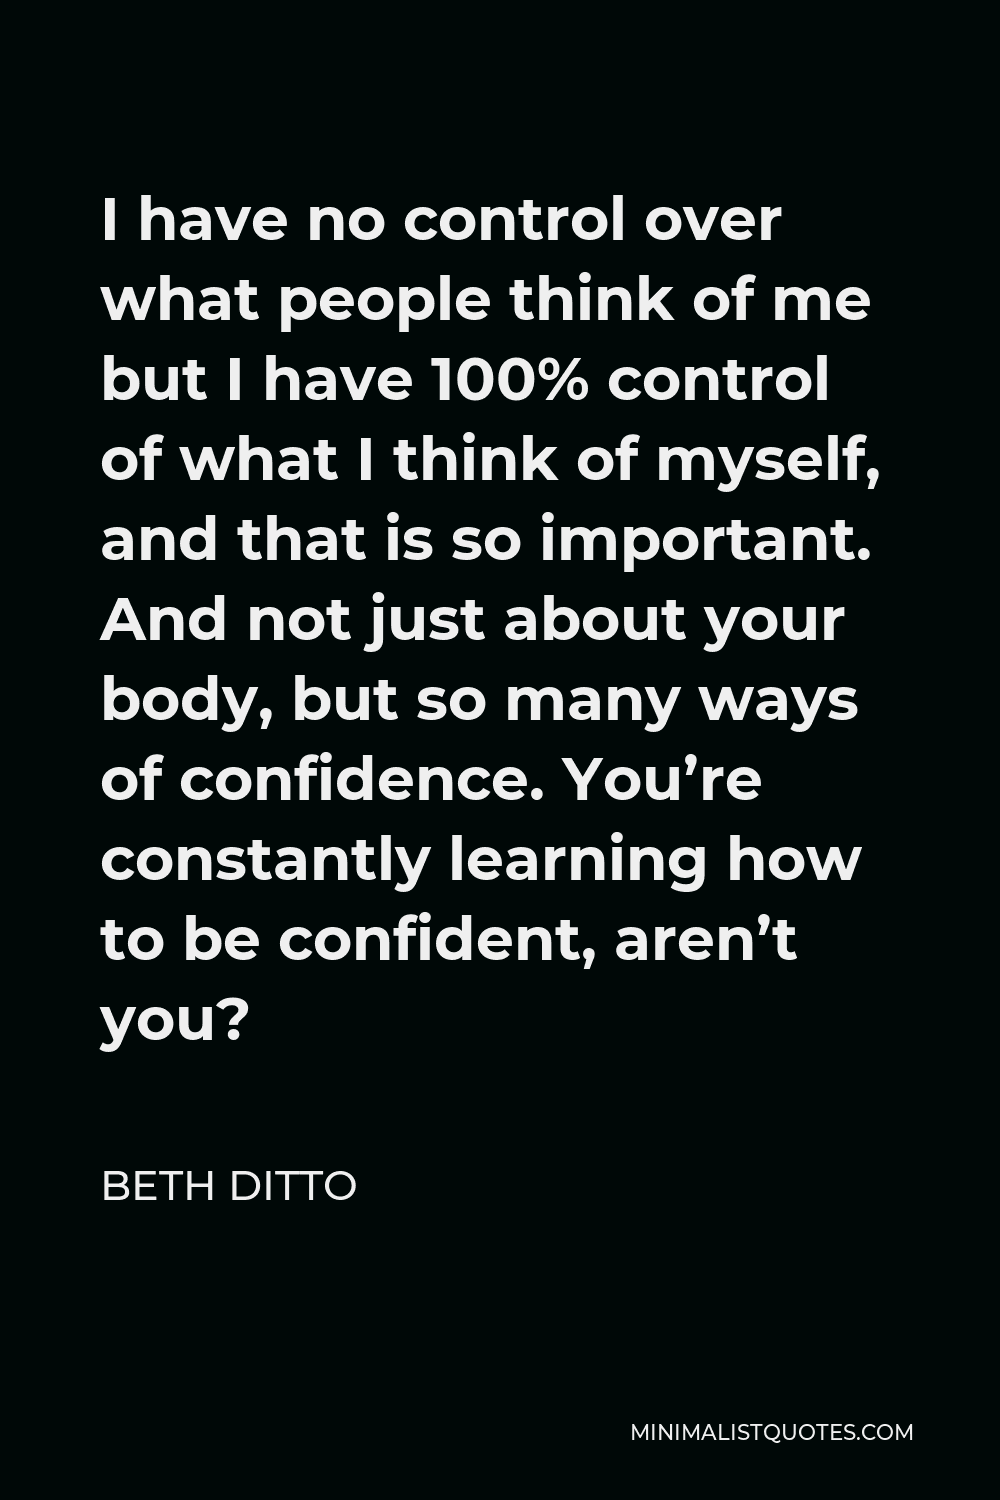 Beth Ditto Quote - I have no control over what people think of me but I have 100% control of what I think of myself, and that is so important. And not just about your body, but so many ways of confidence. You’re constantly learning how to be confident, aren’t you?